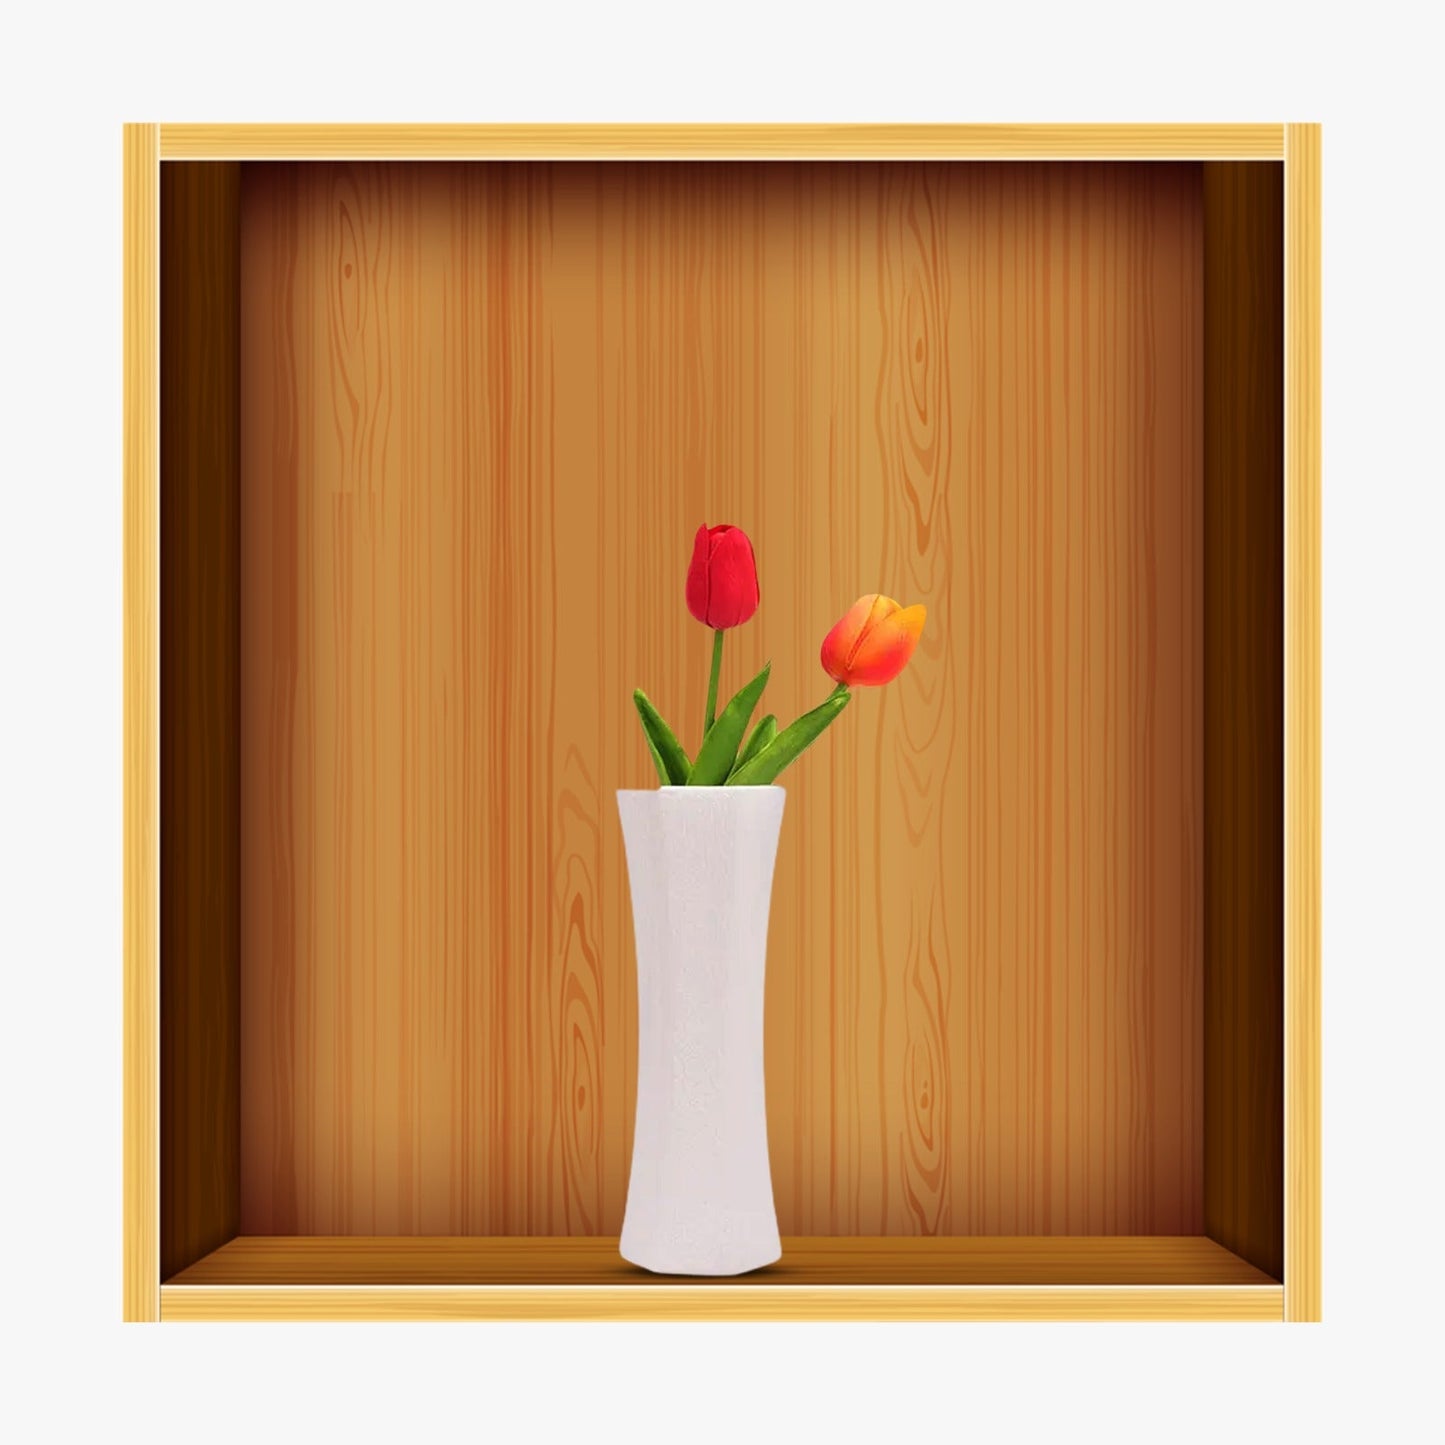 3D Wall Stickers Flower Vase (Pack Of 4)